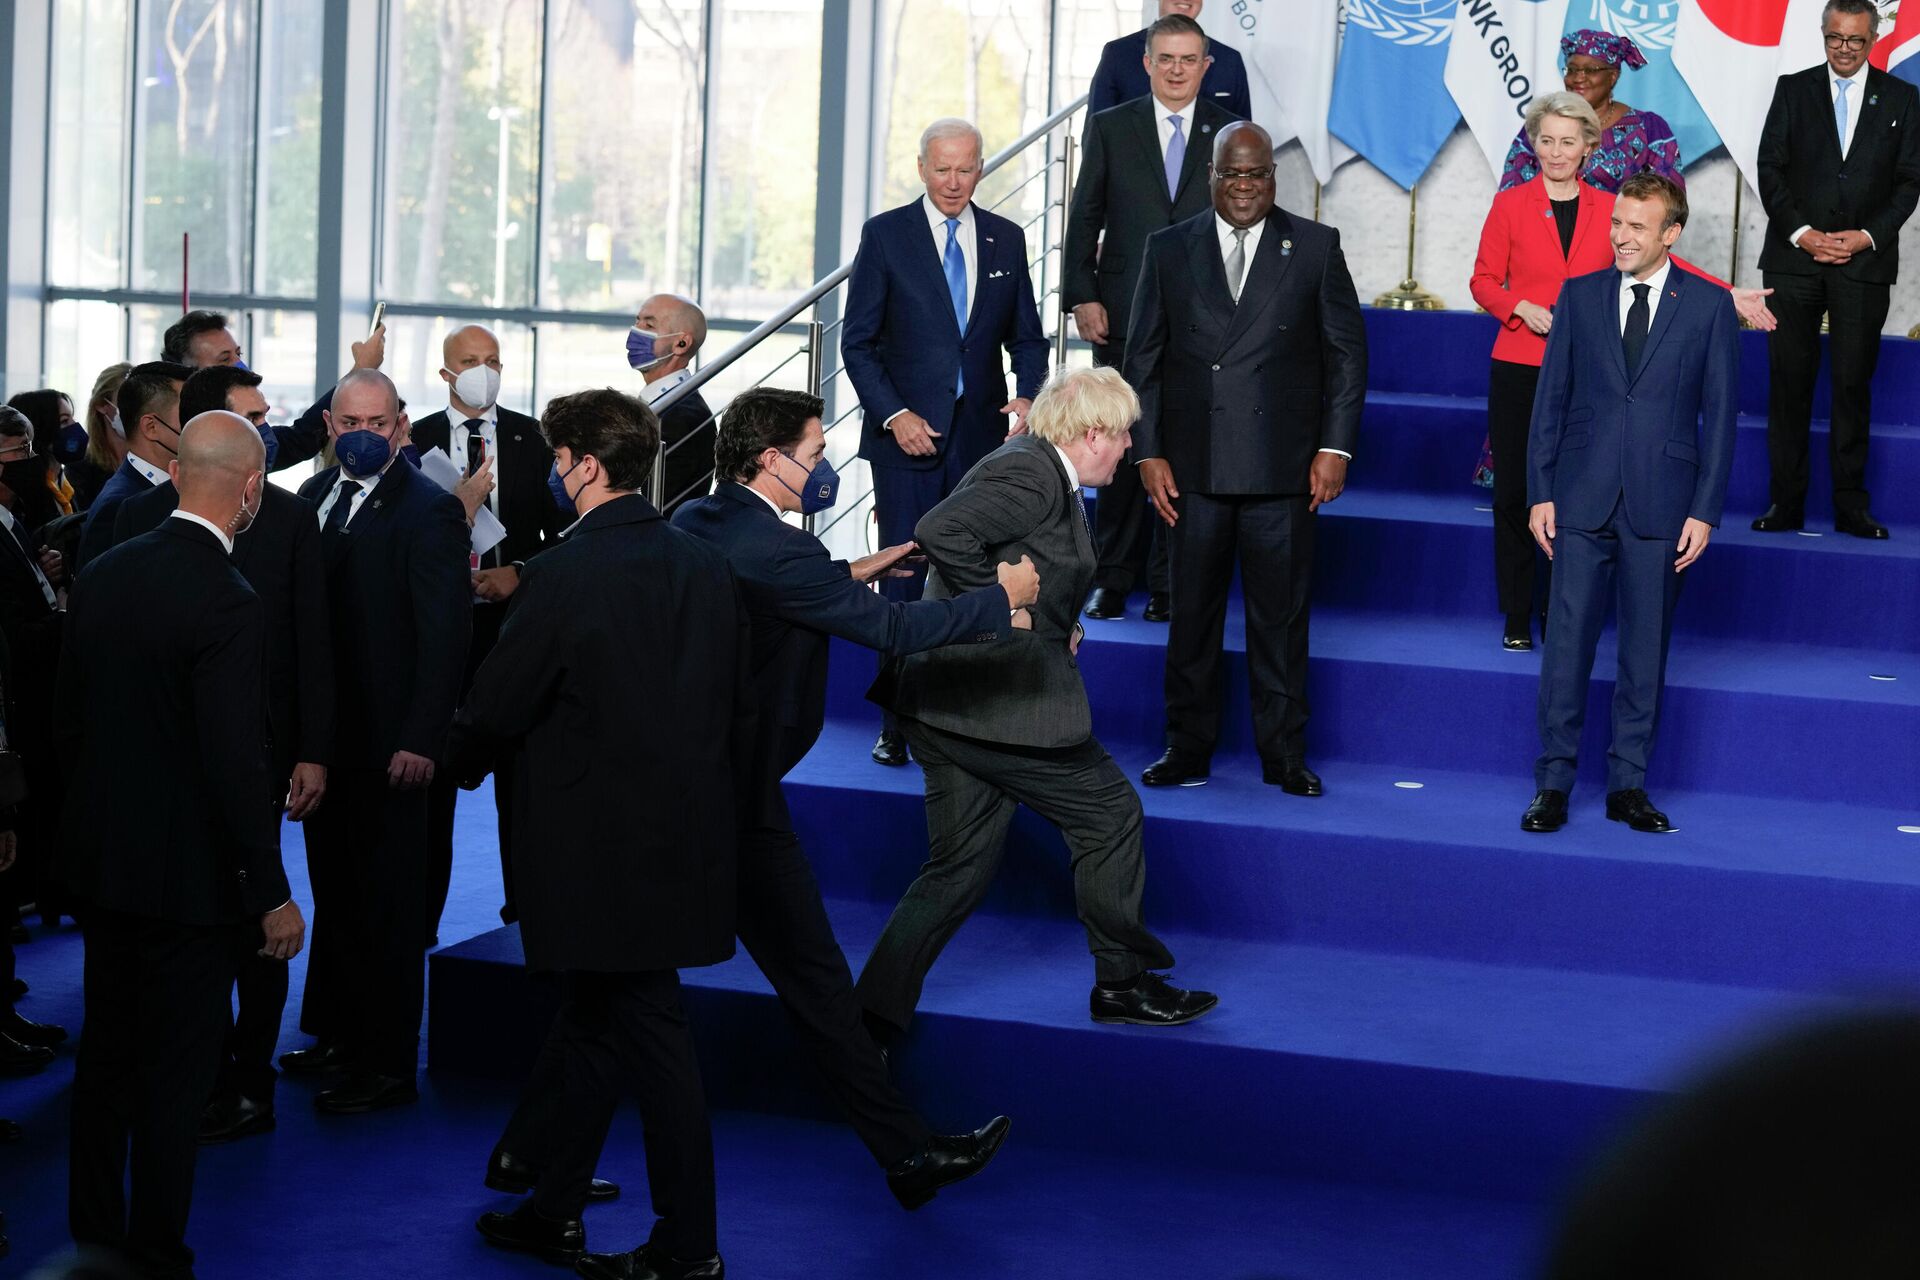 British Prime Minister Boris Johnson, center, is helped up the stage as he arrives late for the group photo if world leaders at the La Nuvola conference center for the G20 summit in Rome, Saturday, Oct. 30, 2021.  - Sputnik International, 1920, 30.10.2021